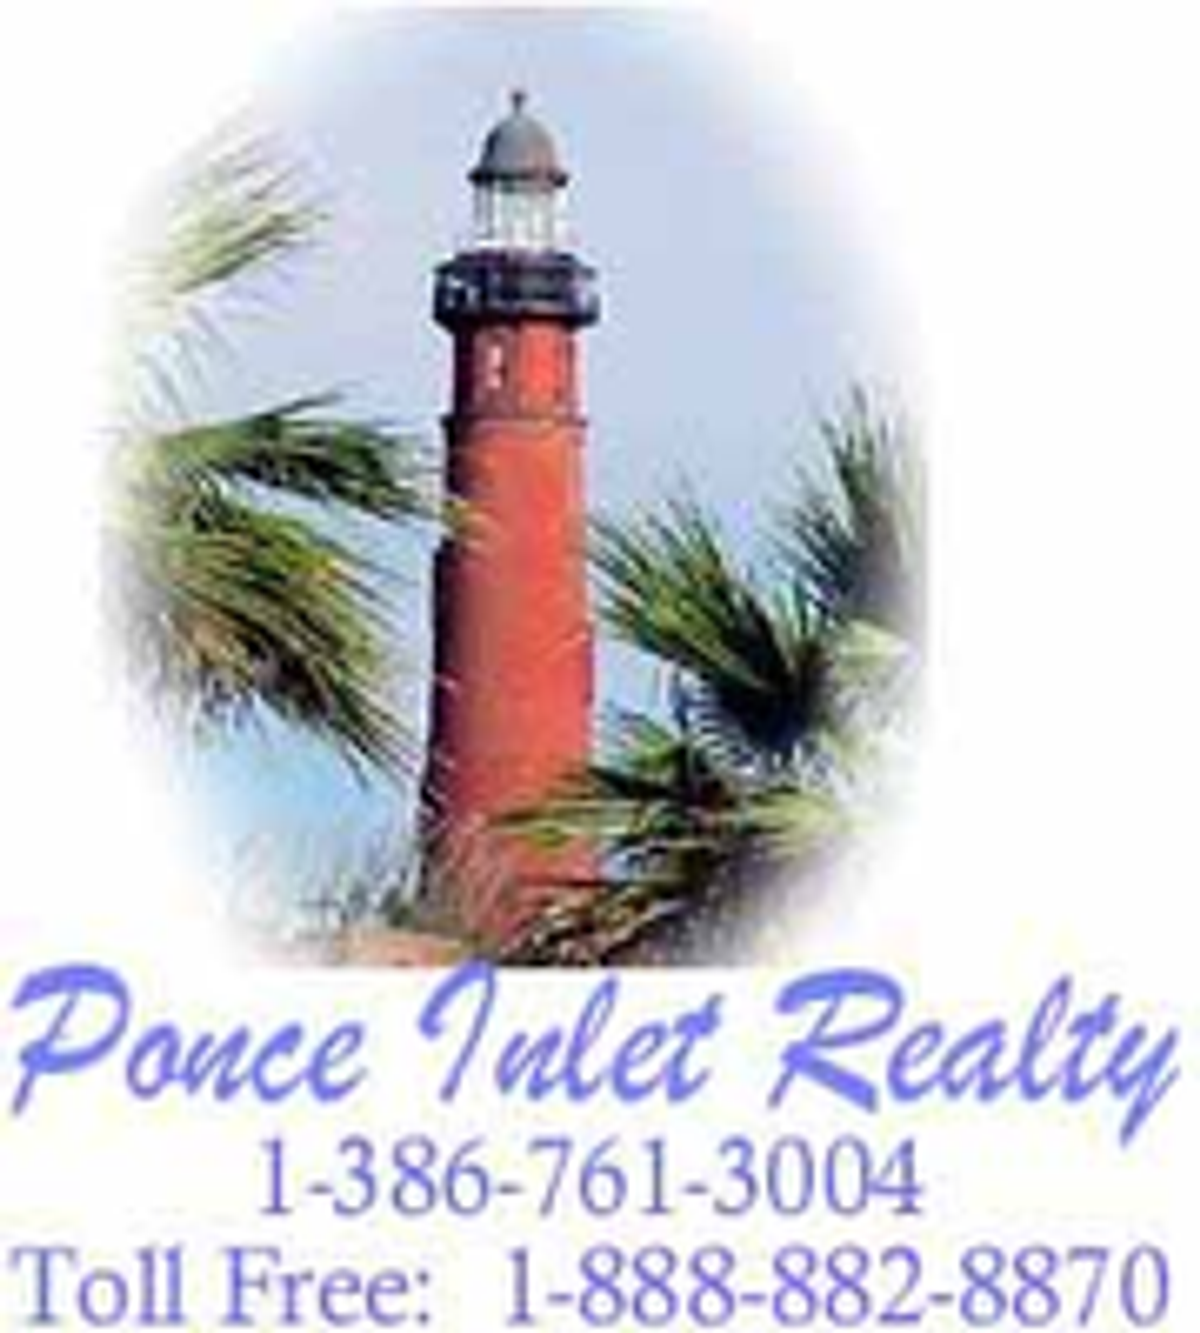 Photo for Janet Richter, Listing Agent at Ponce Inlet Realty, Inc